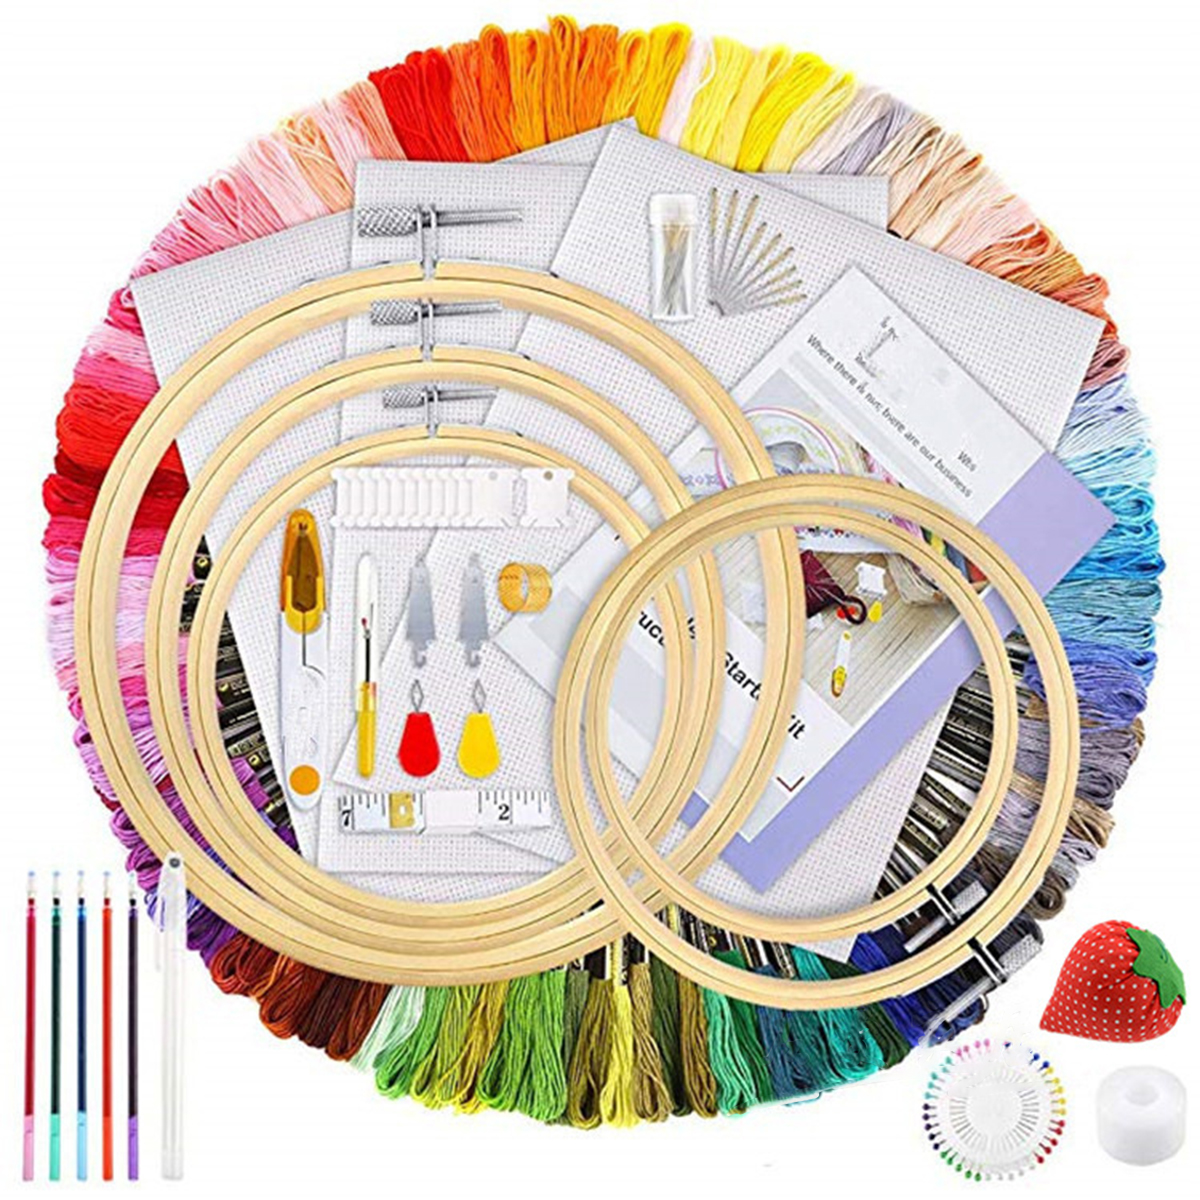 Embroidery Supplies Embroidery Thread Kit Cross Stitch Tools  for Starter.